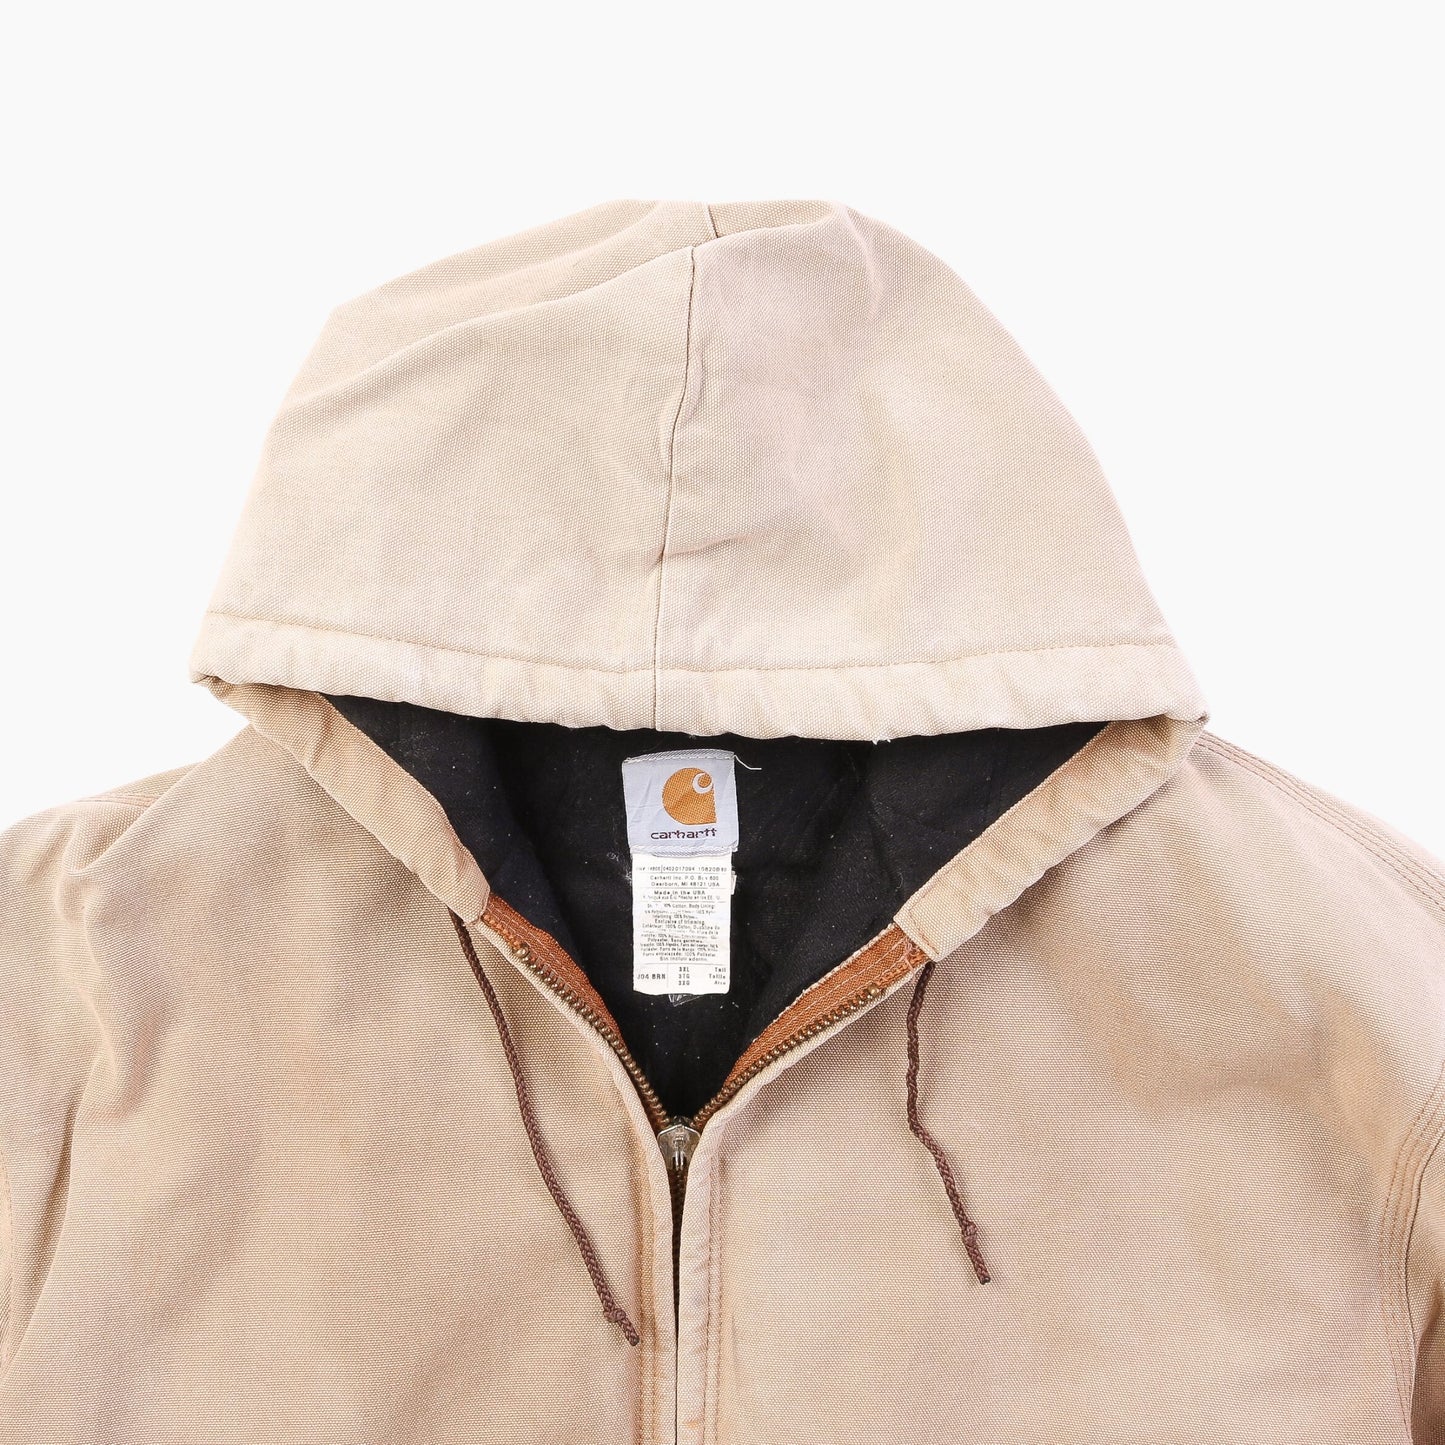 Active Hooded Jacket -  Hamilton Brown - American Madness